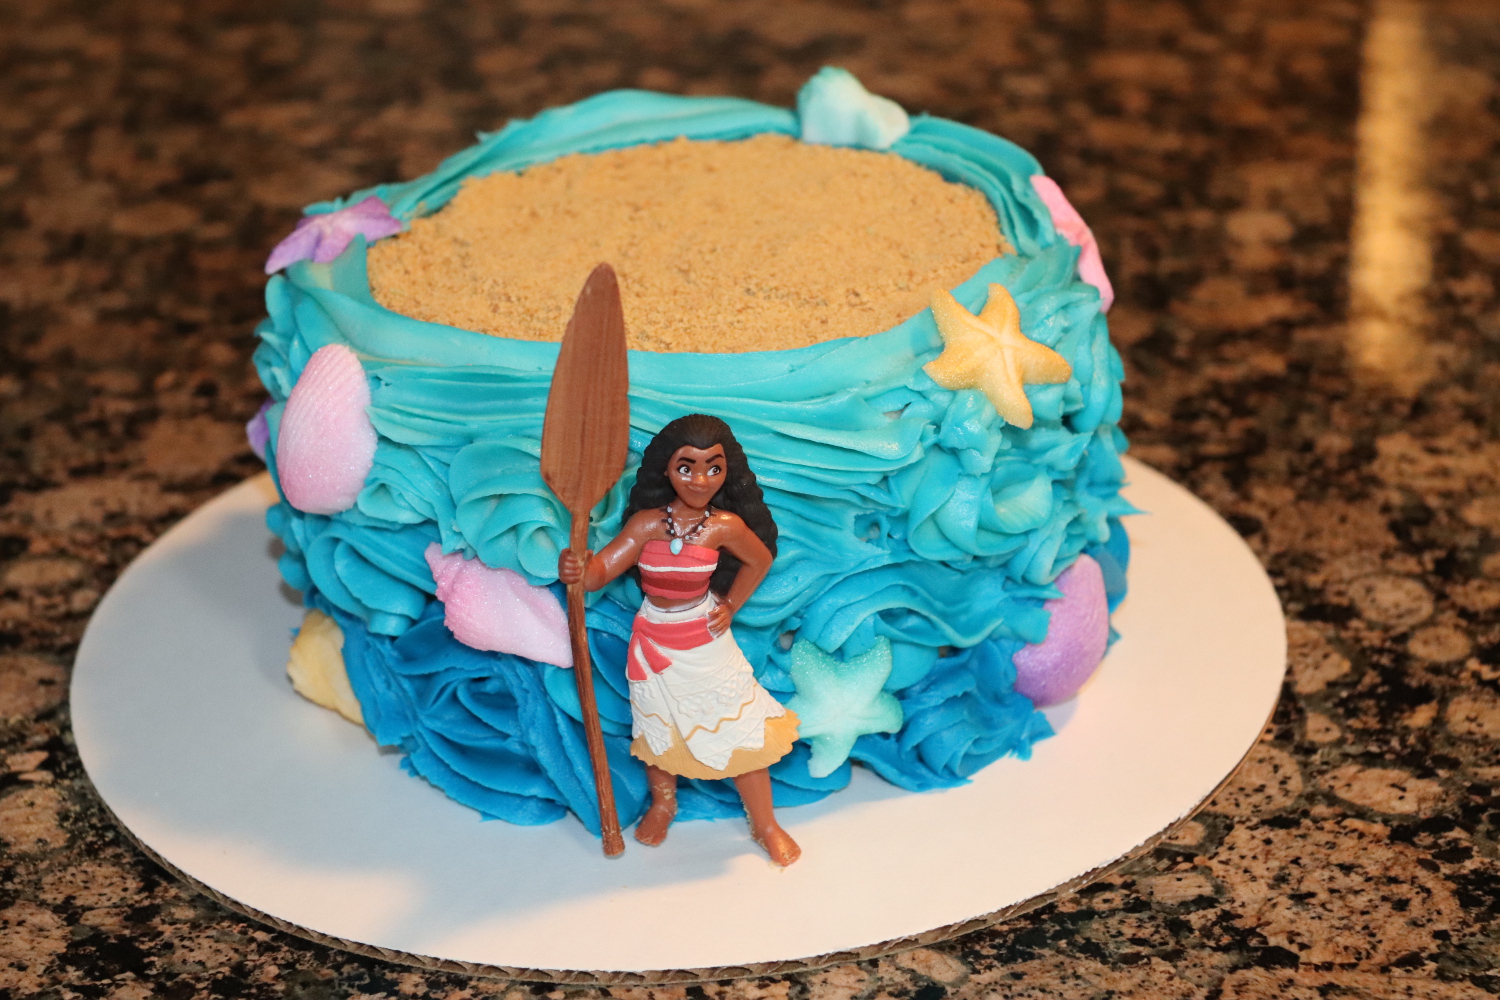 Moana Smash Cake for a Friend's First Birthday